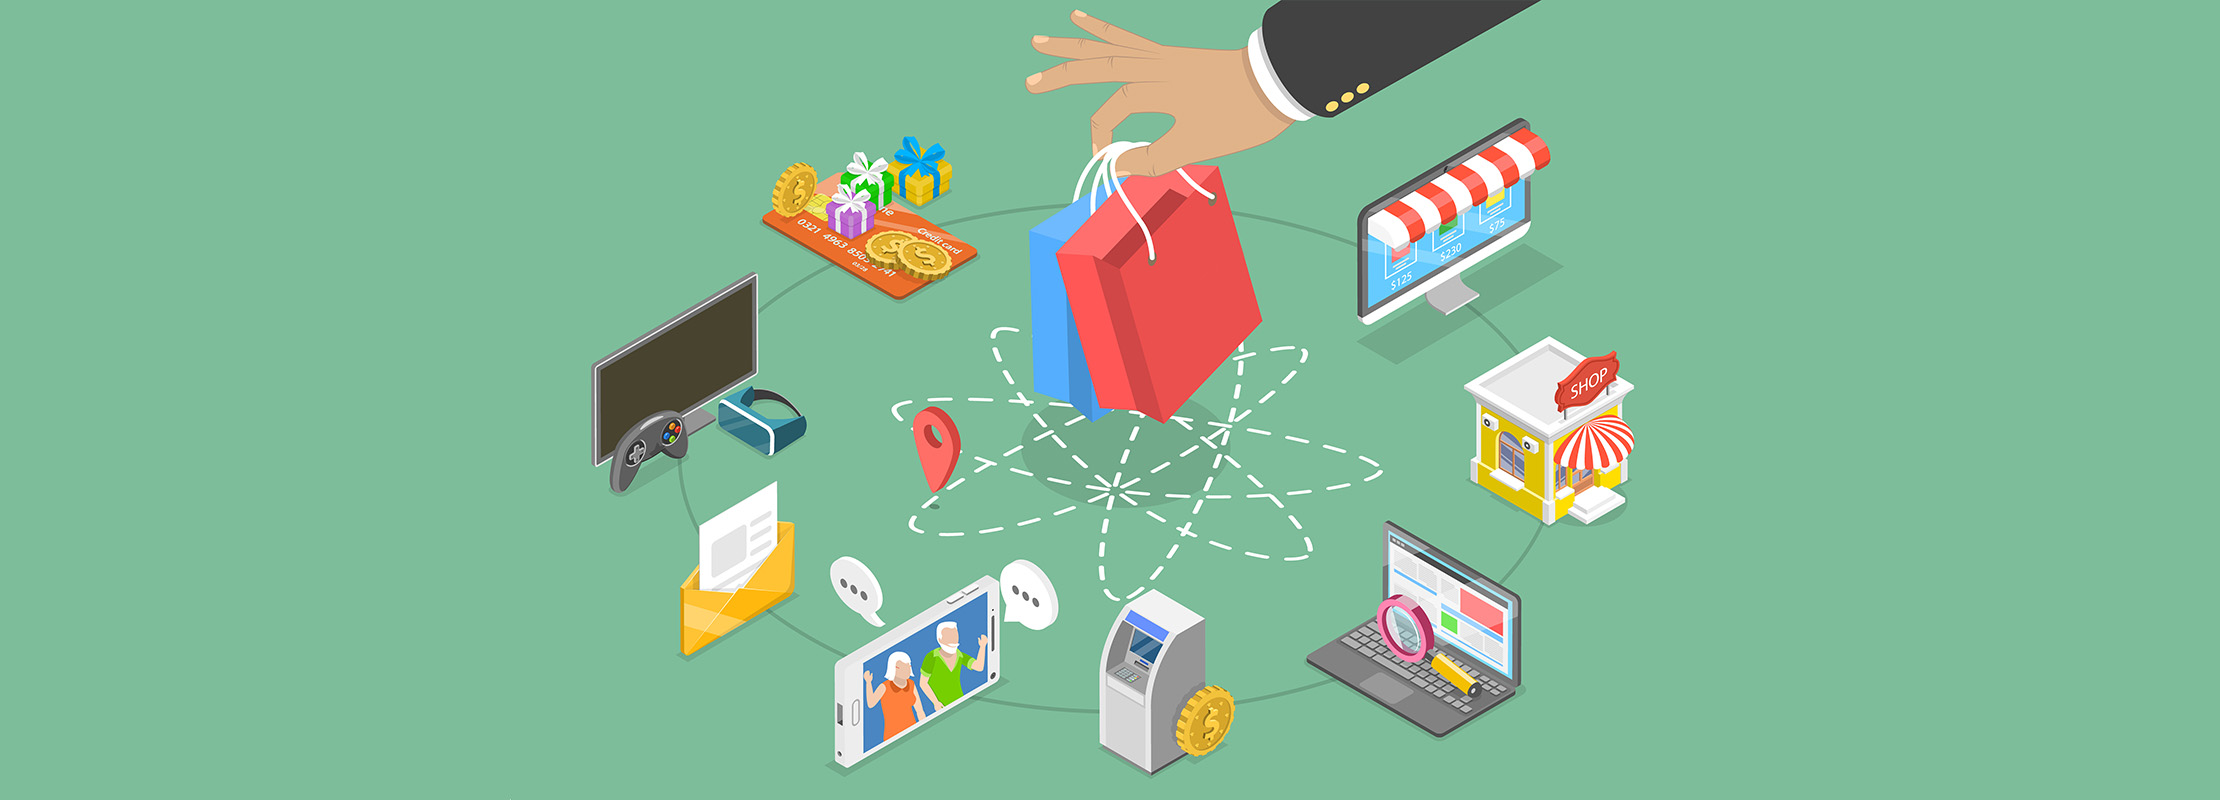 Omnichannel Retail in 2023: What the Trends are Saying